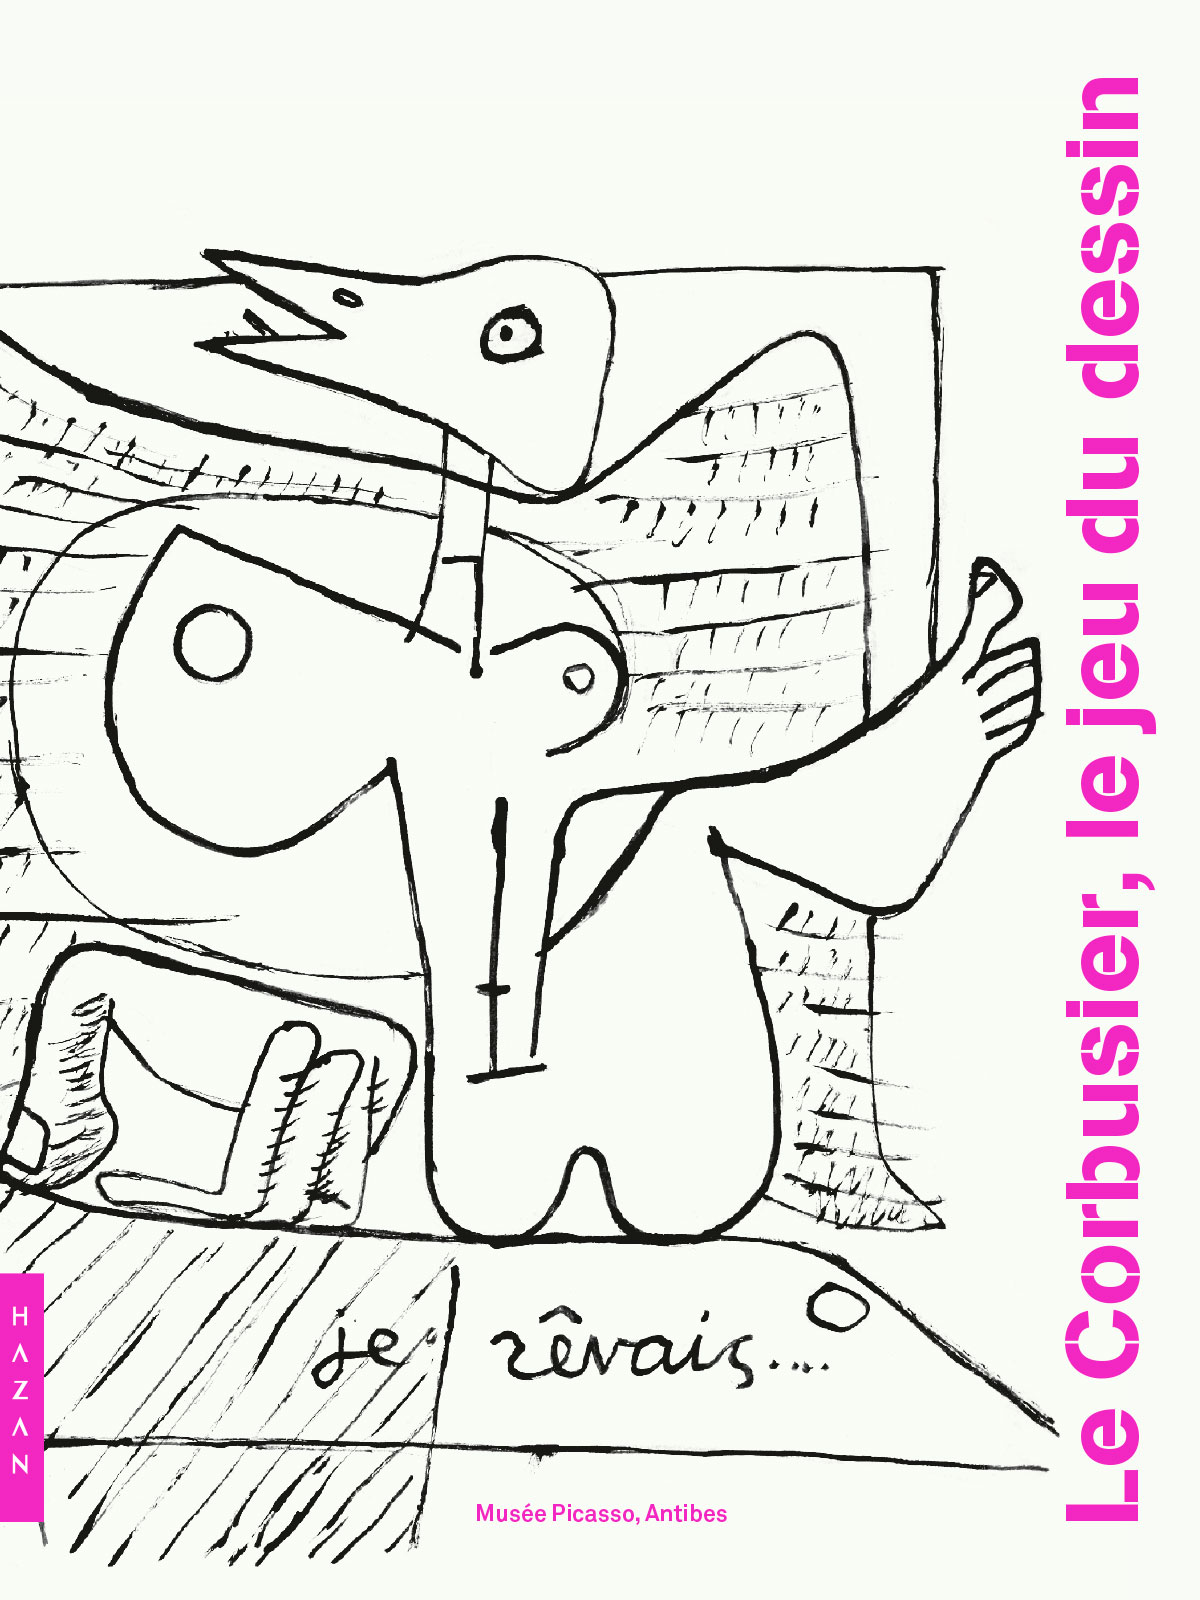 musee_picasso_corbusier_5.jpg